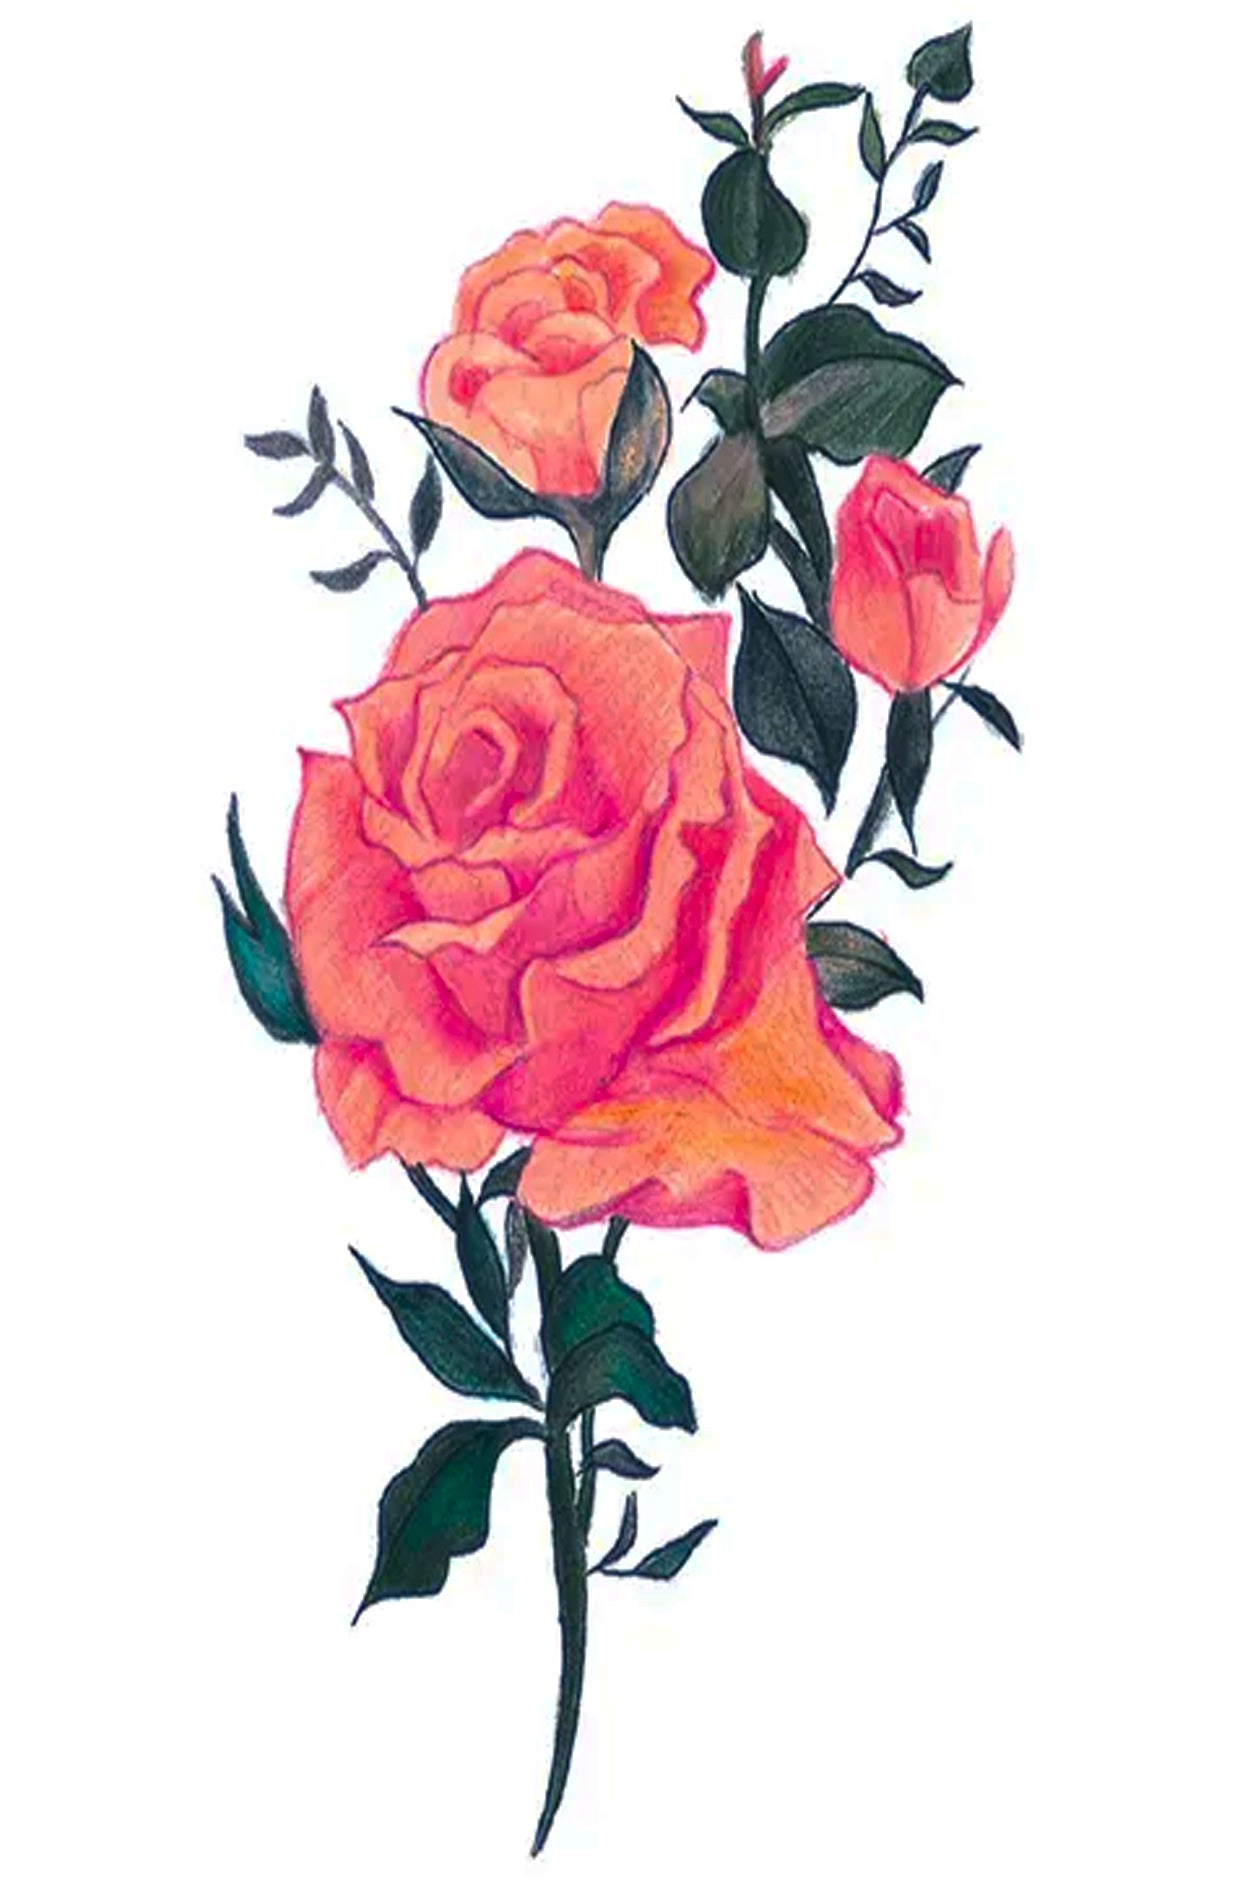 Peach roses are typically a symbol of sincerity, innocent affection, care, gratitude, and warm feelings. This artwork is an excellent way of showing gratitude, admiration, and thoughtful care as a gift temporary tattoo.